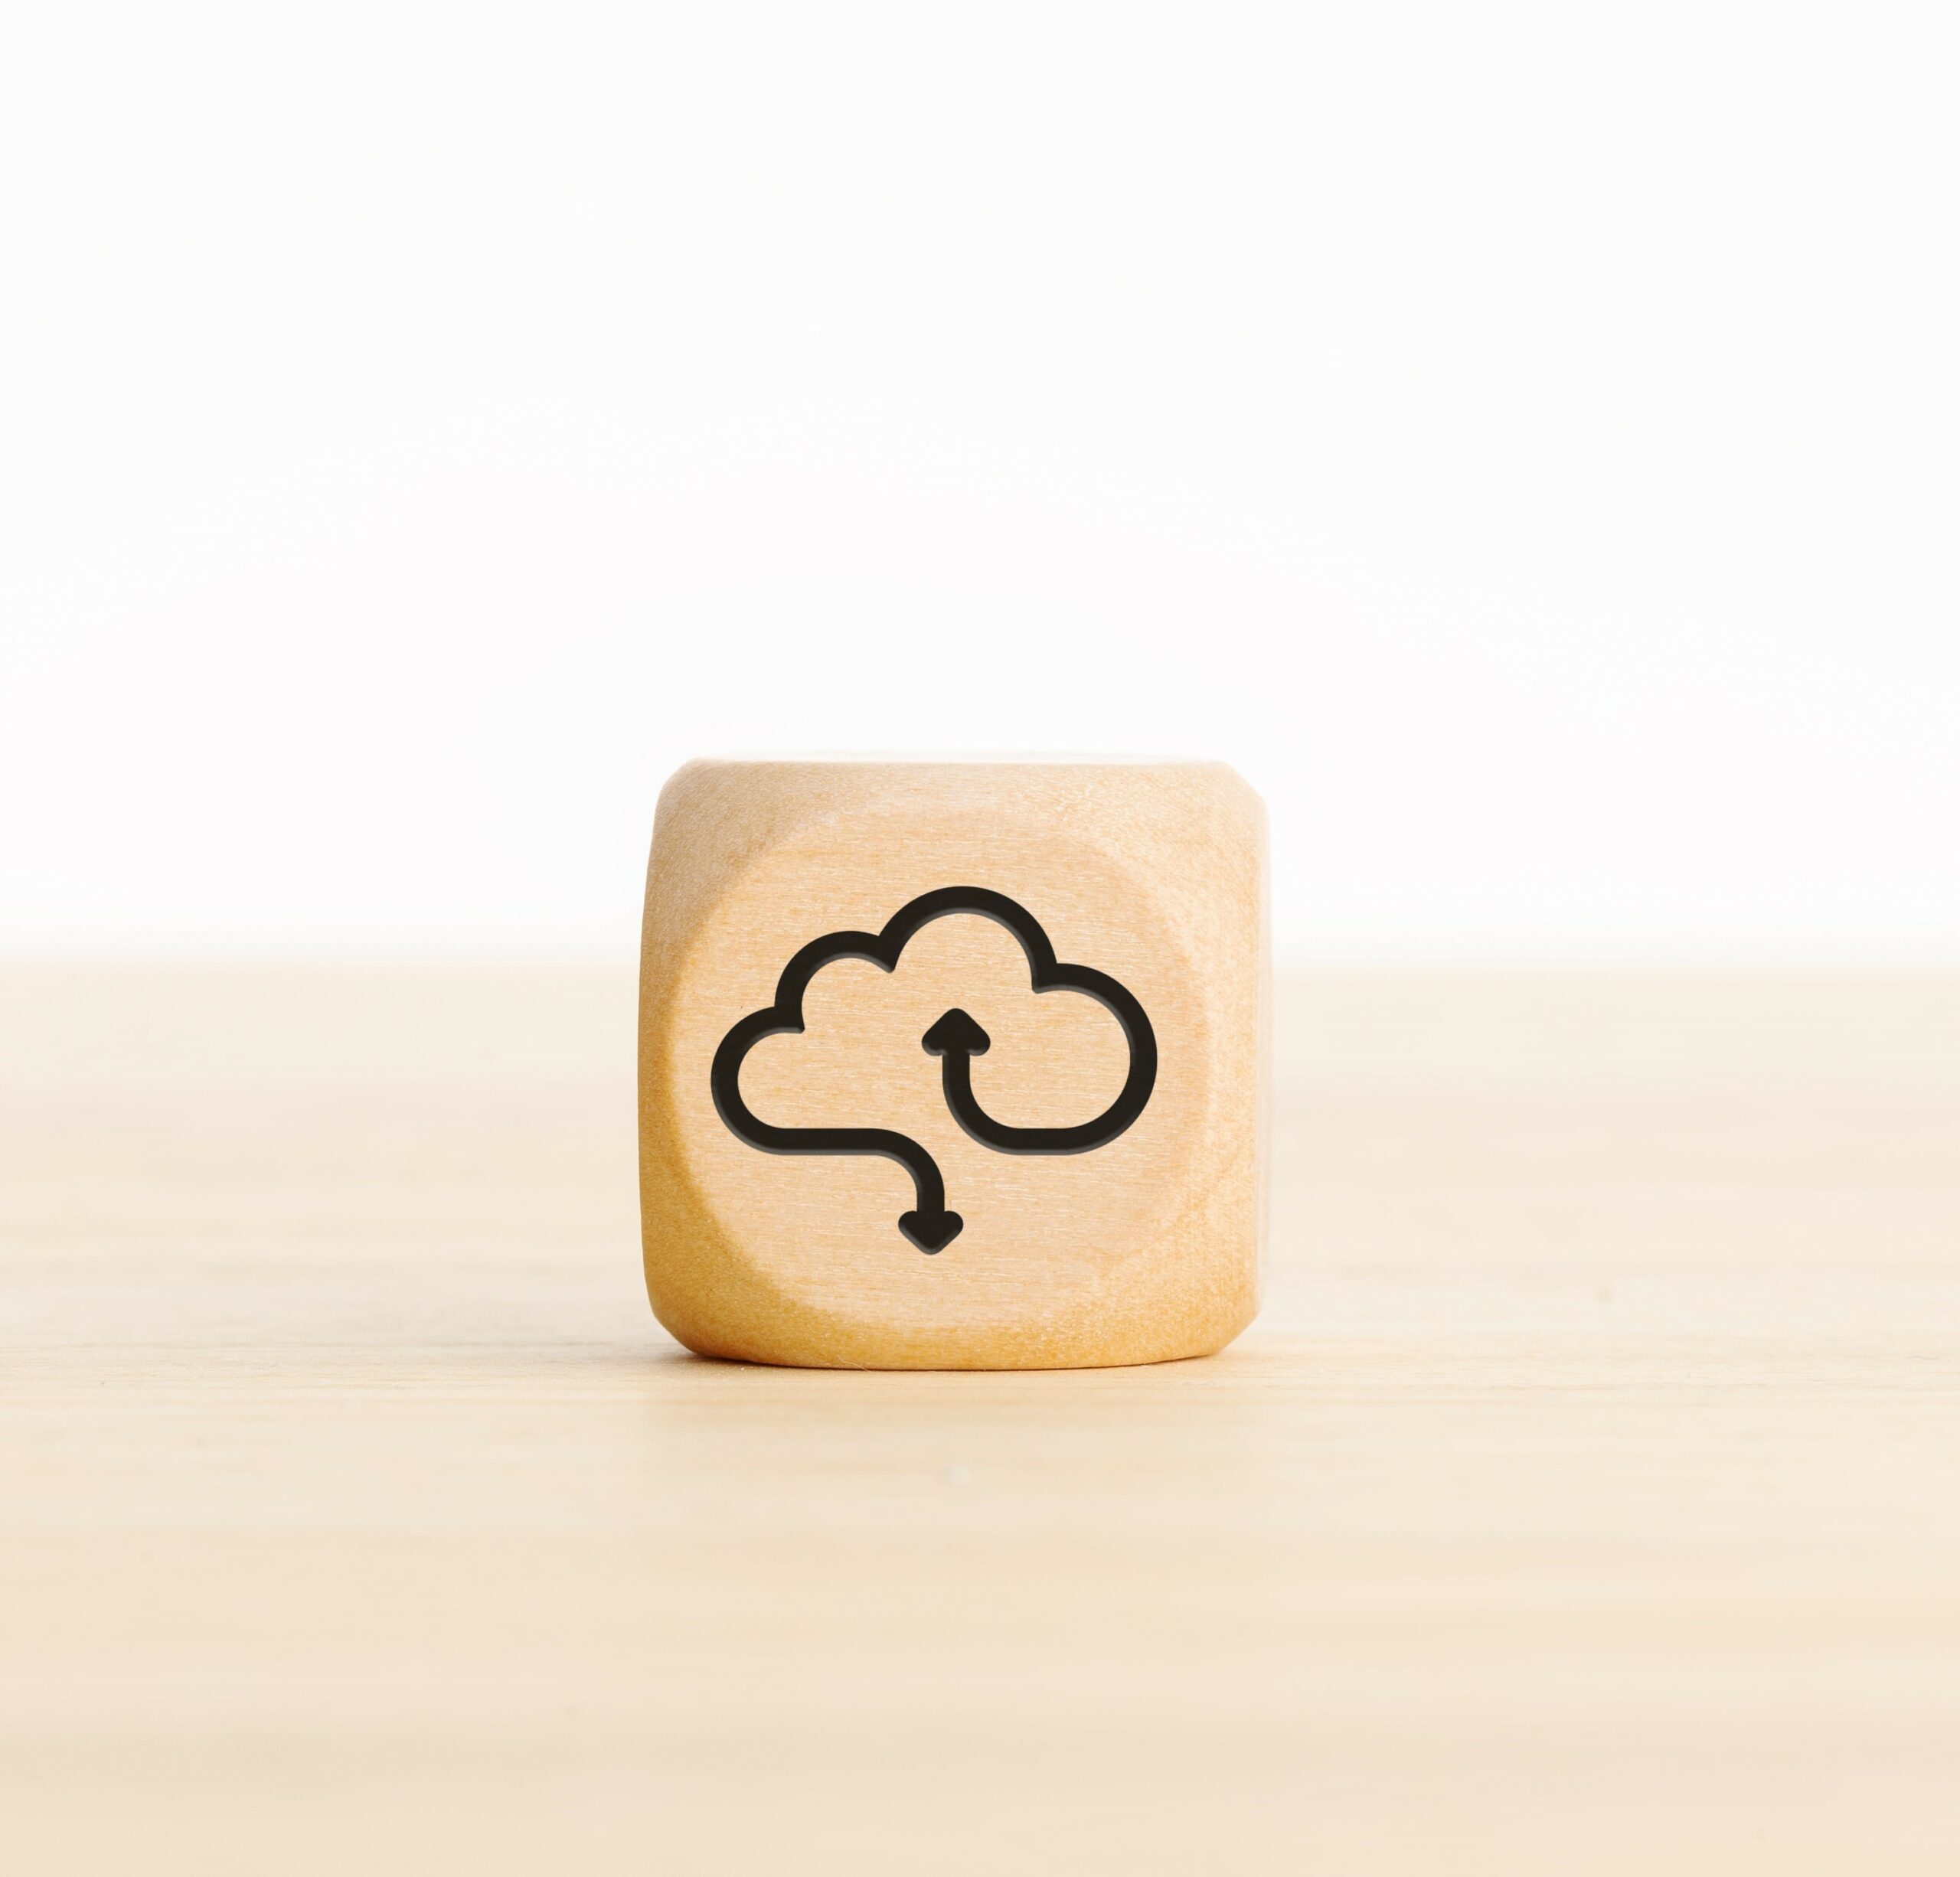 5 Cloud Architecture Considerations that Every Enterprise Should Make